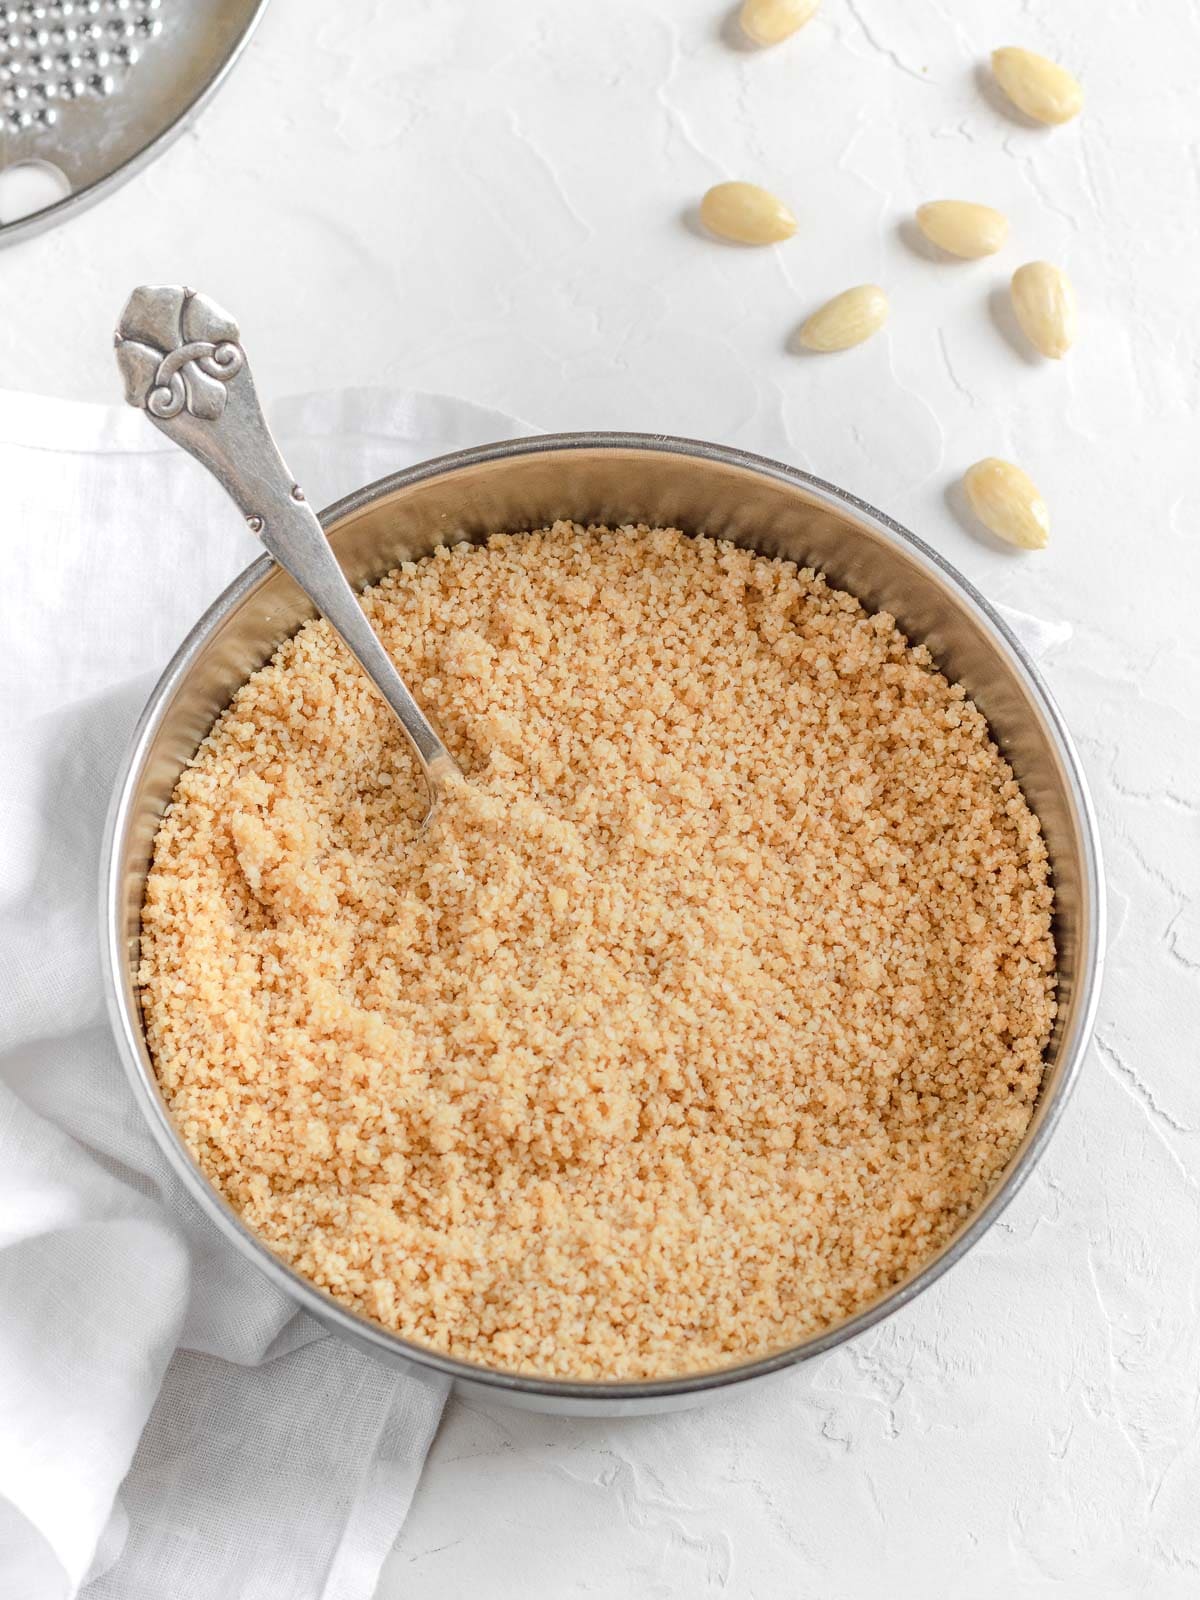 vegan parmesan cheese in a bowl ready to be used as topping